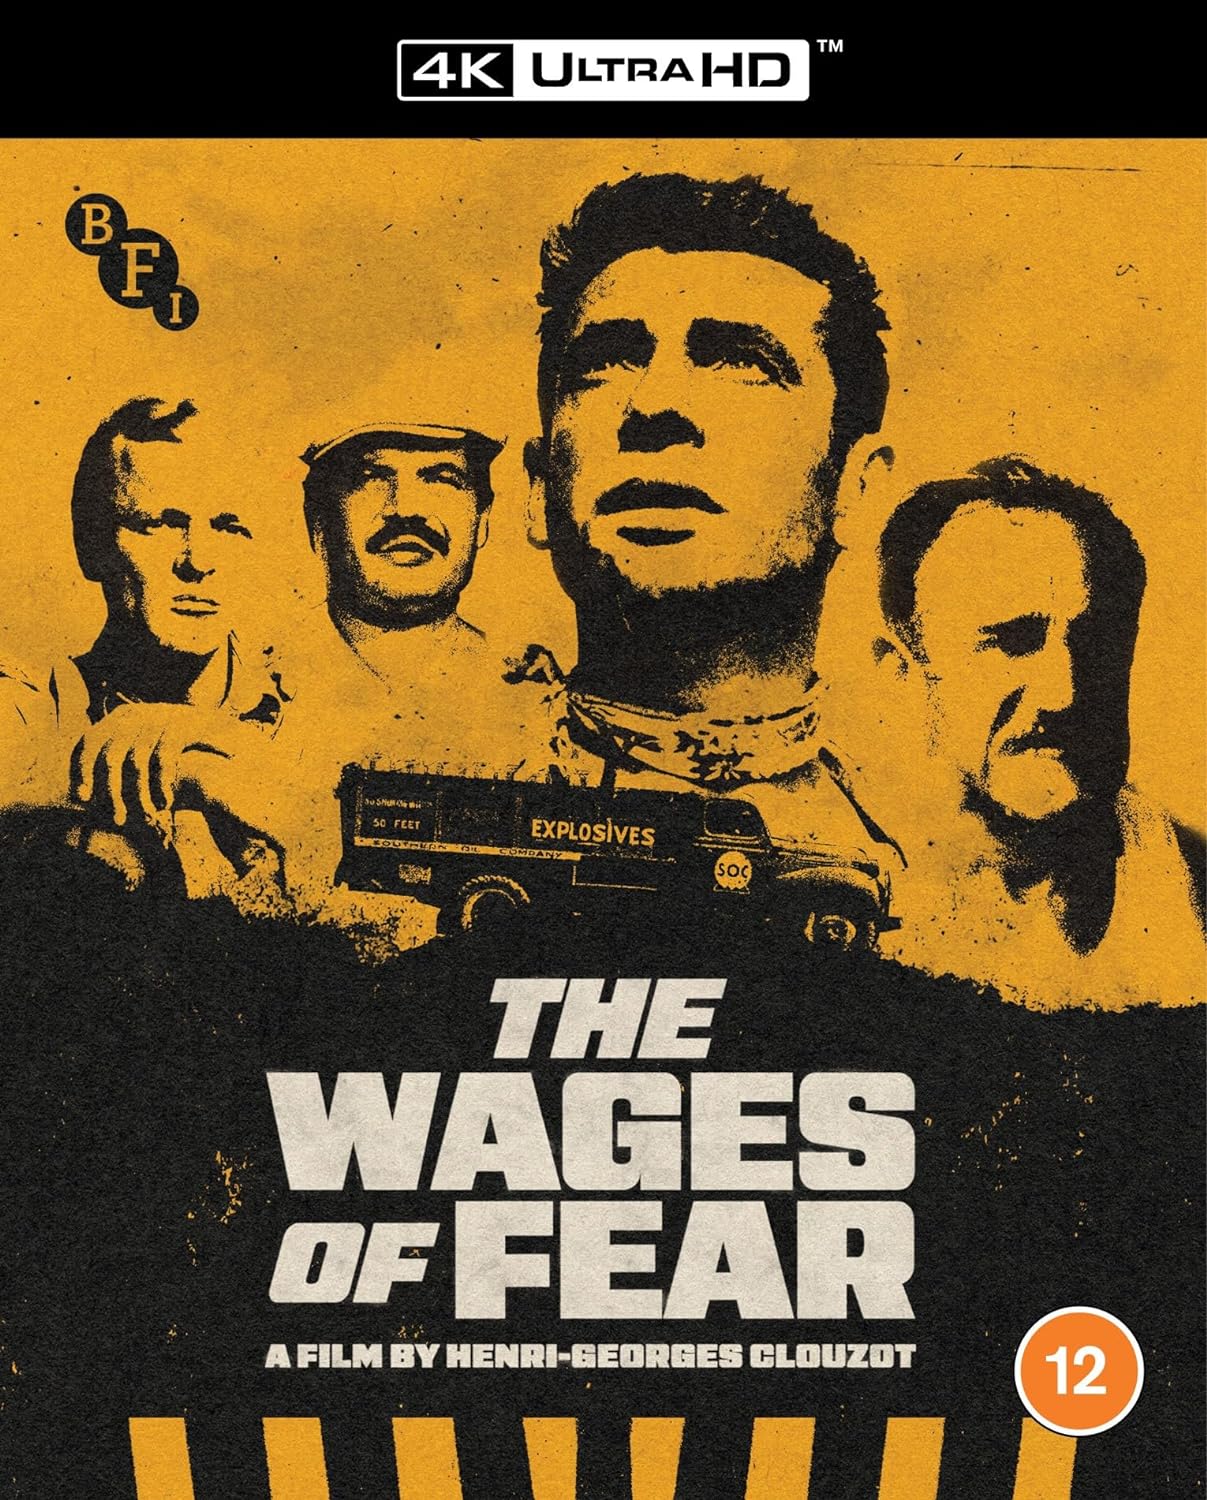 The Wages Of Fear Limited Edition BFI 4K UHD [PRE-ORDER]